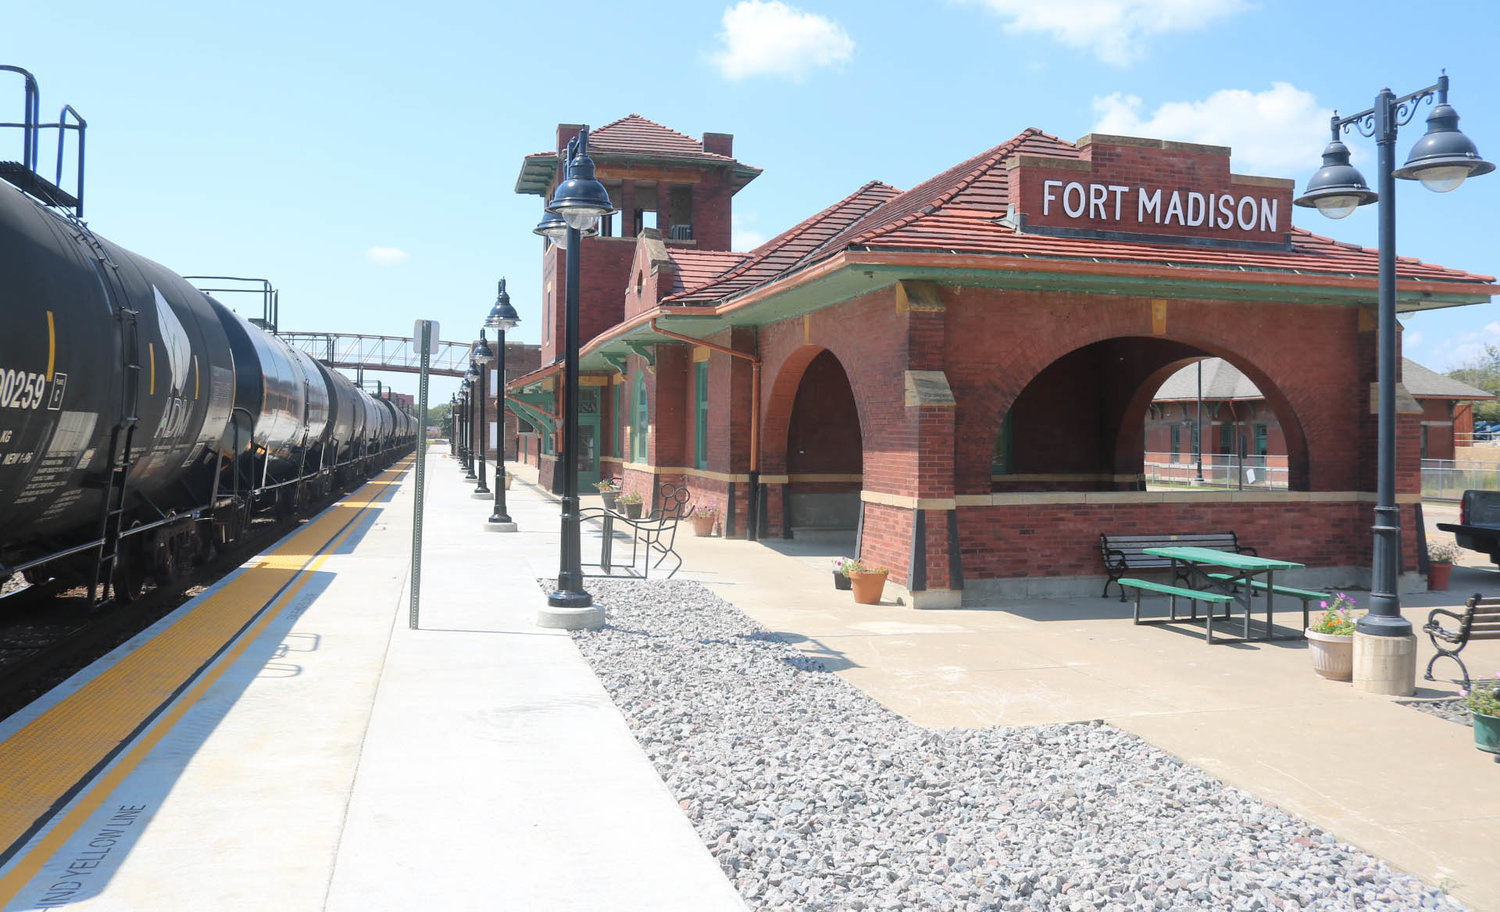 Fort Madison officials will step off an Amtrak train on Dec. 10 as the first passengers to be dropped off at the relocated Amtrak depot at 6 p.m. with a ribbon cutting at 6:30 p.m. The community is invited to come out to the reception that is set to start at about 6 p.m. with fireworks, bands, speakers and refreshments. Photo by Chuck Vandenberg/PCC